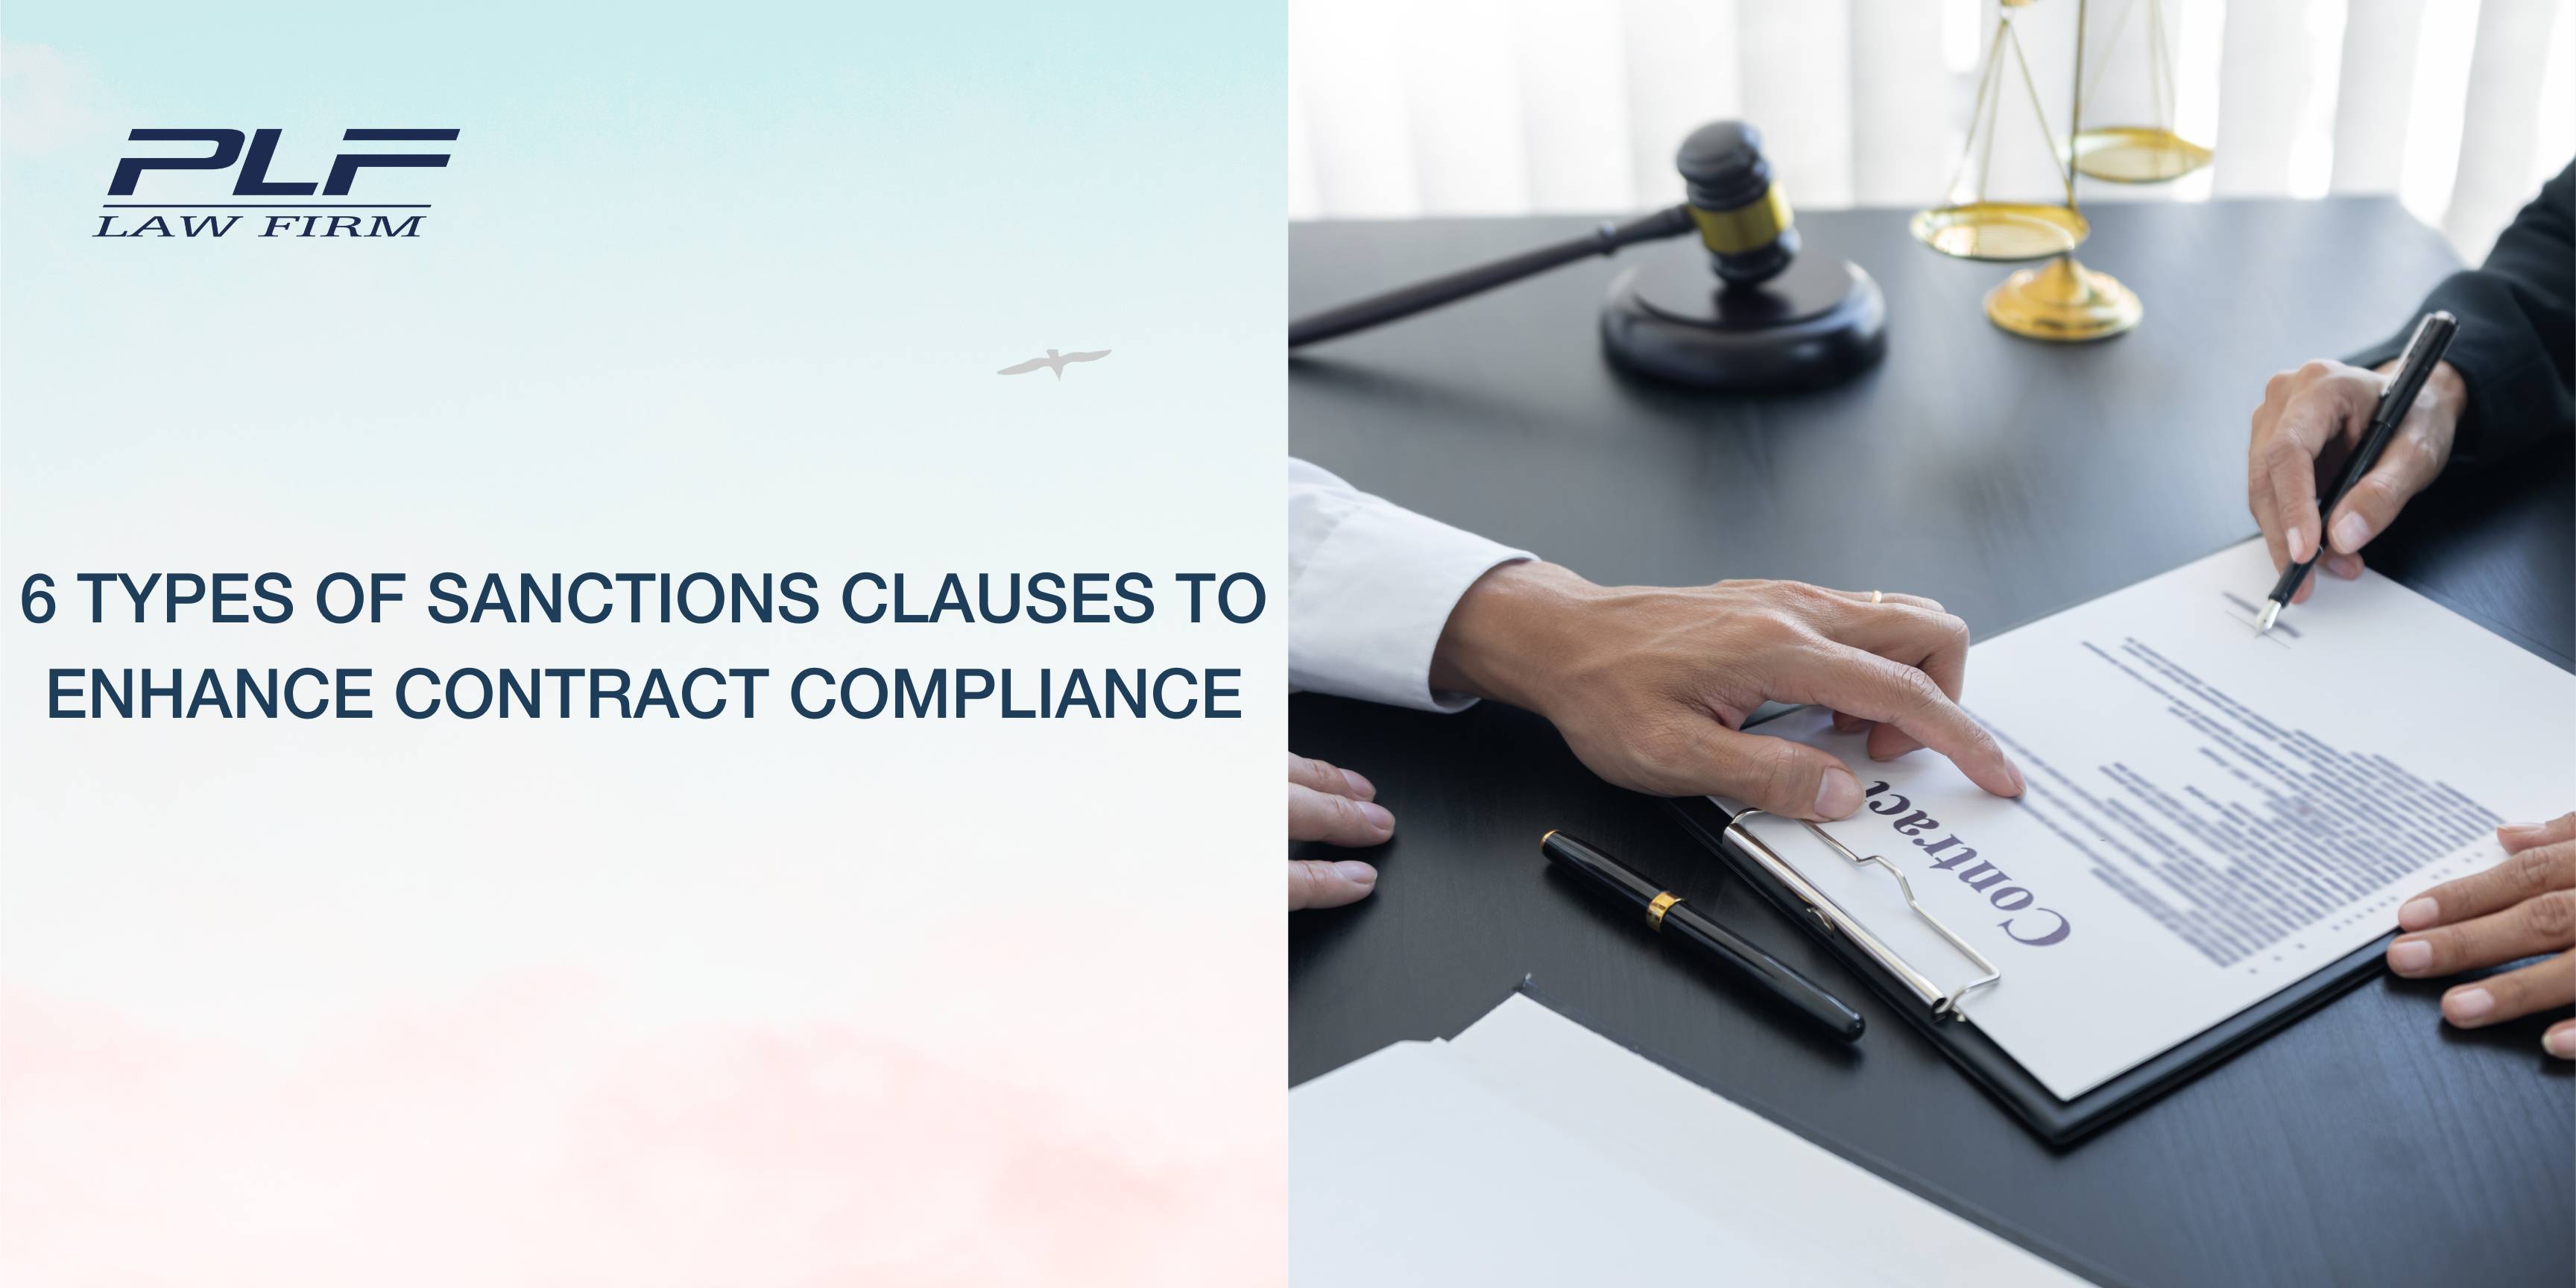 Plf 6 Types Of Sanctions Clauses To Enhance Contract Compliance